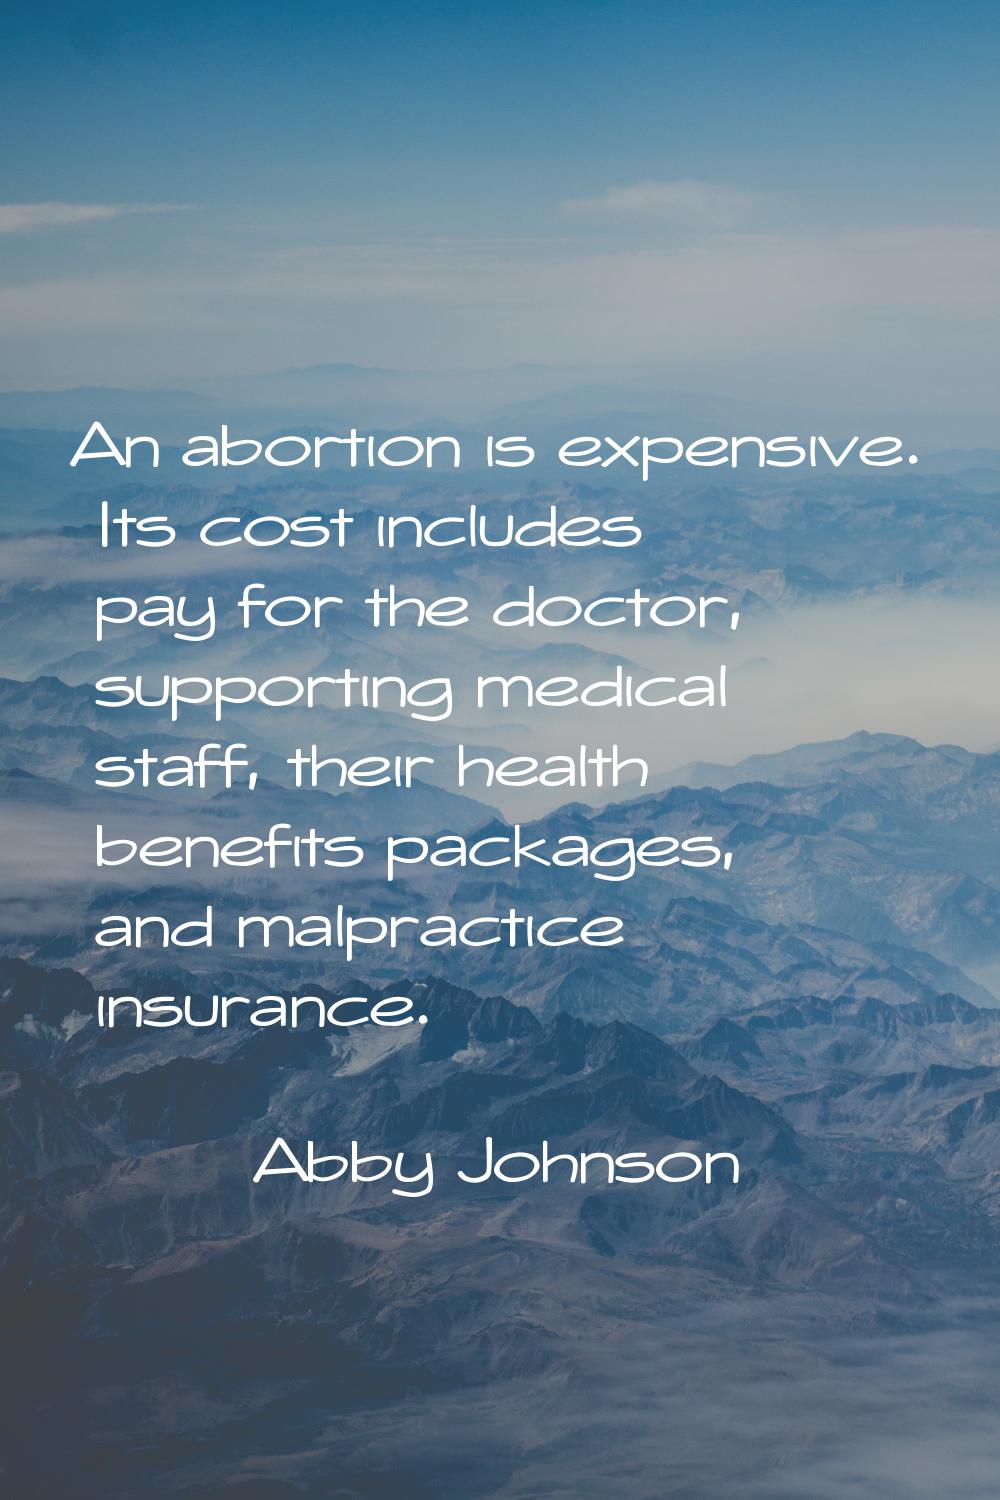 An abortion is expensive. Its cost includes pay for the doctor, supporting medical staff, their hea